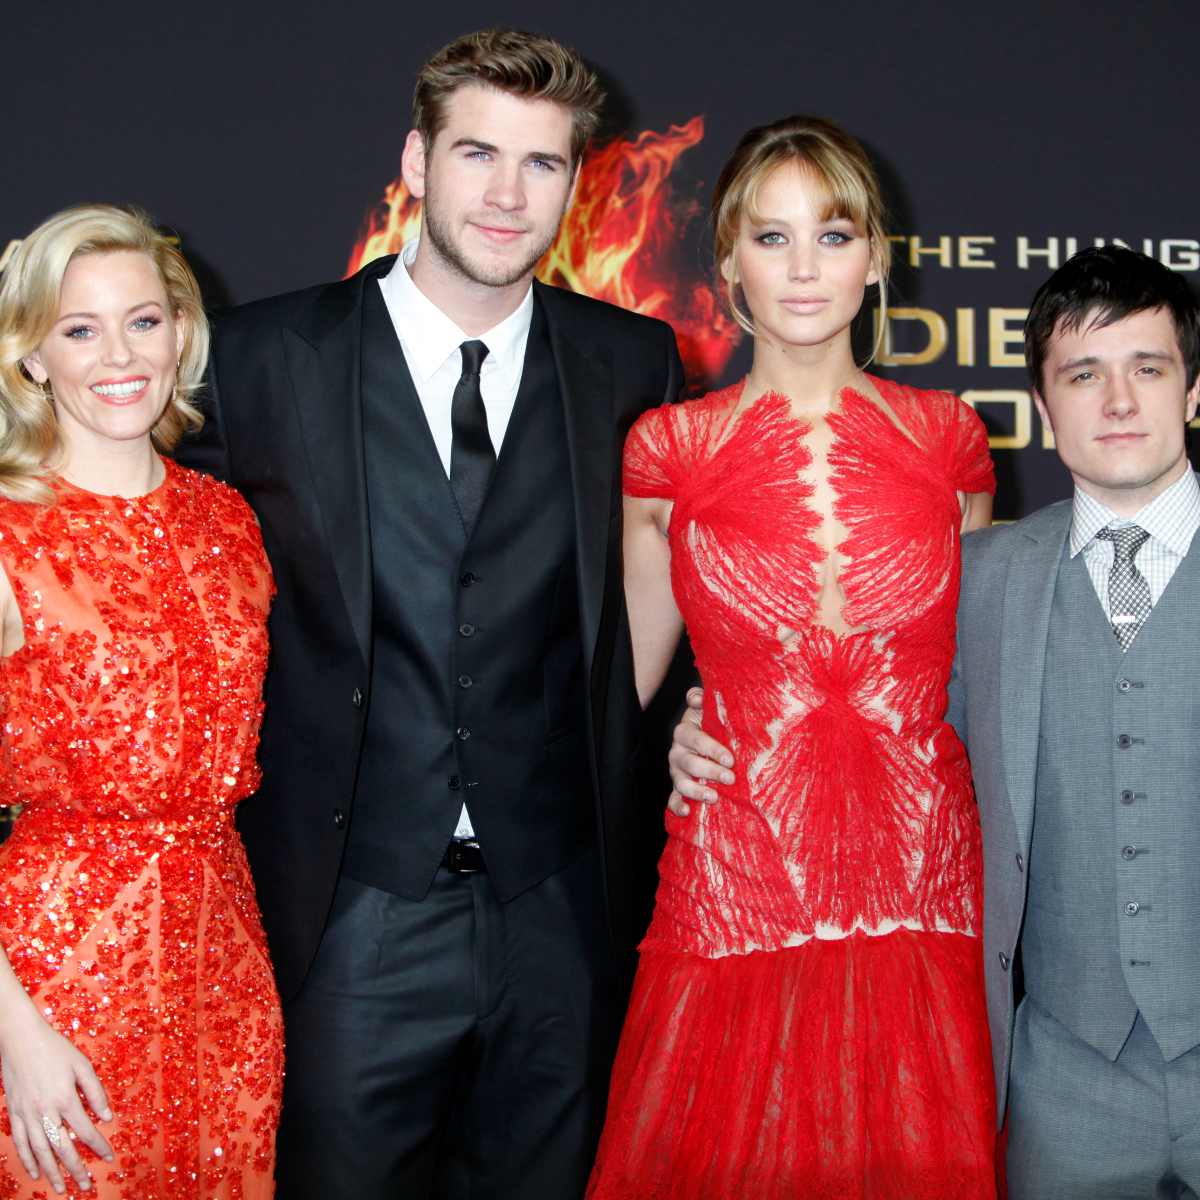 Then vs Now: Here’s where the cast members of The Hunger Games are 9 years later